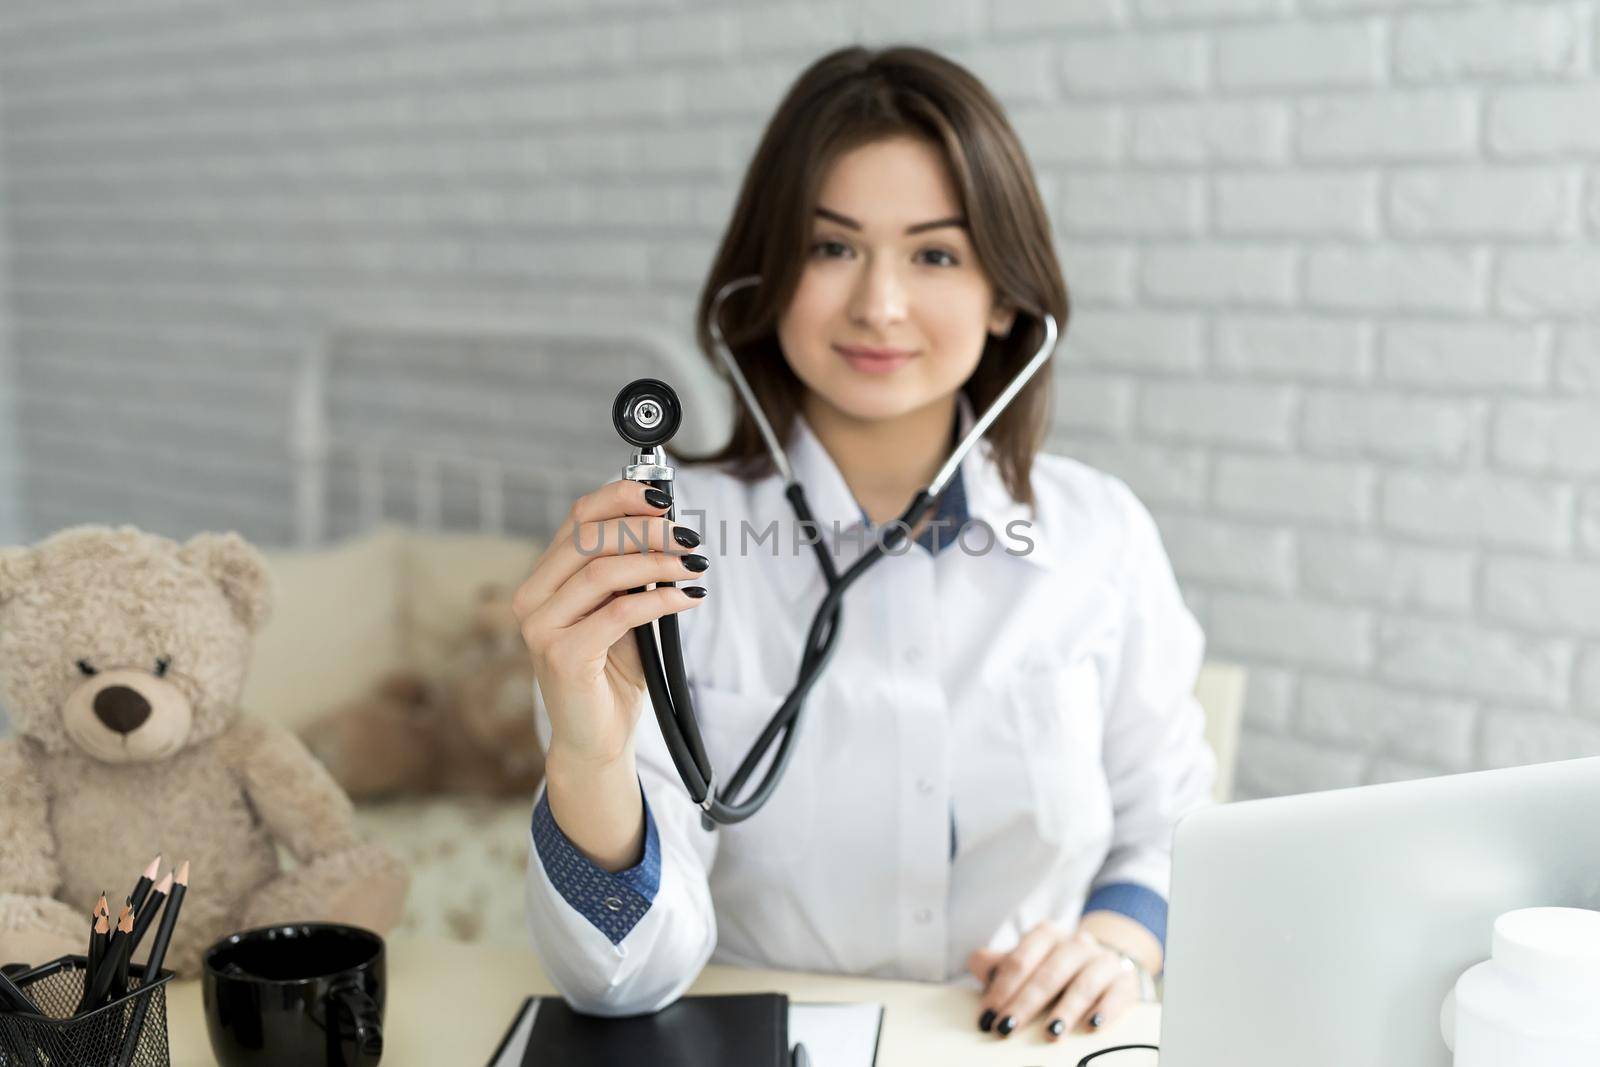 Medical doctor woman holding a stethoscope focus on the stethoscope